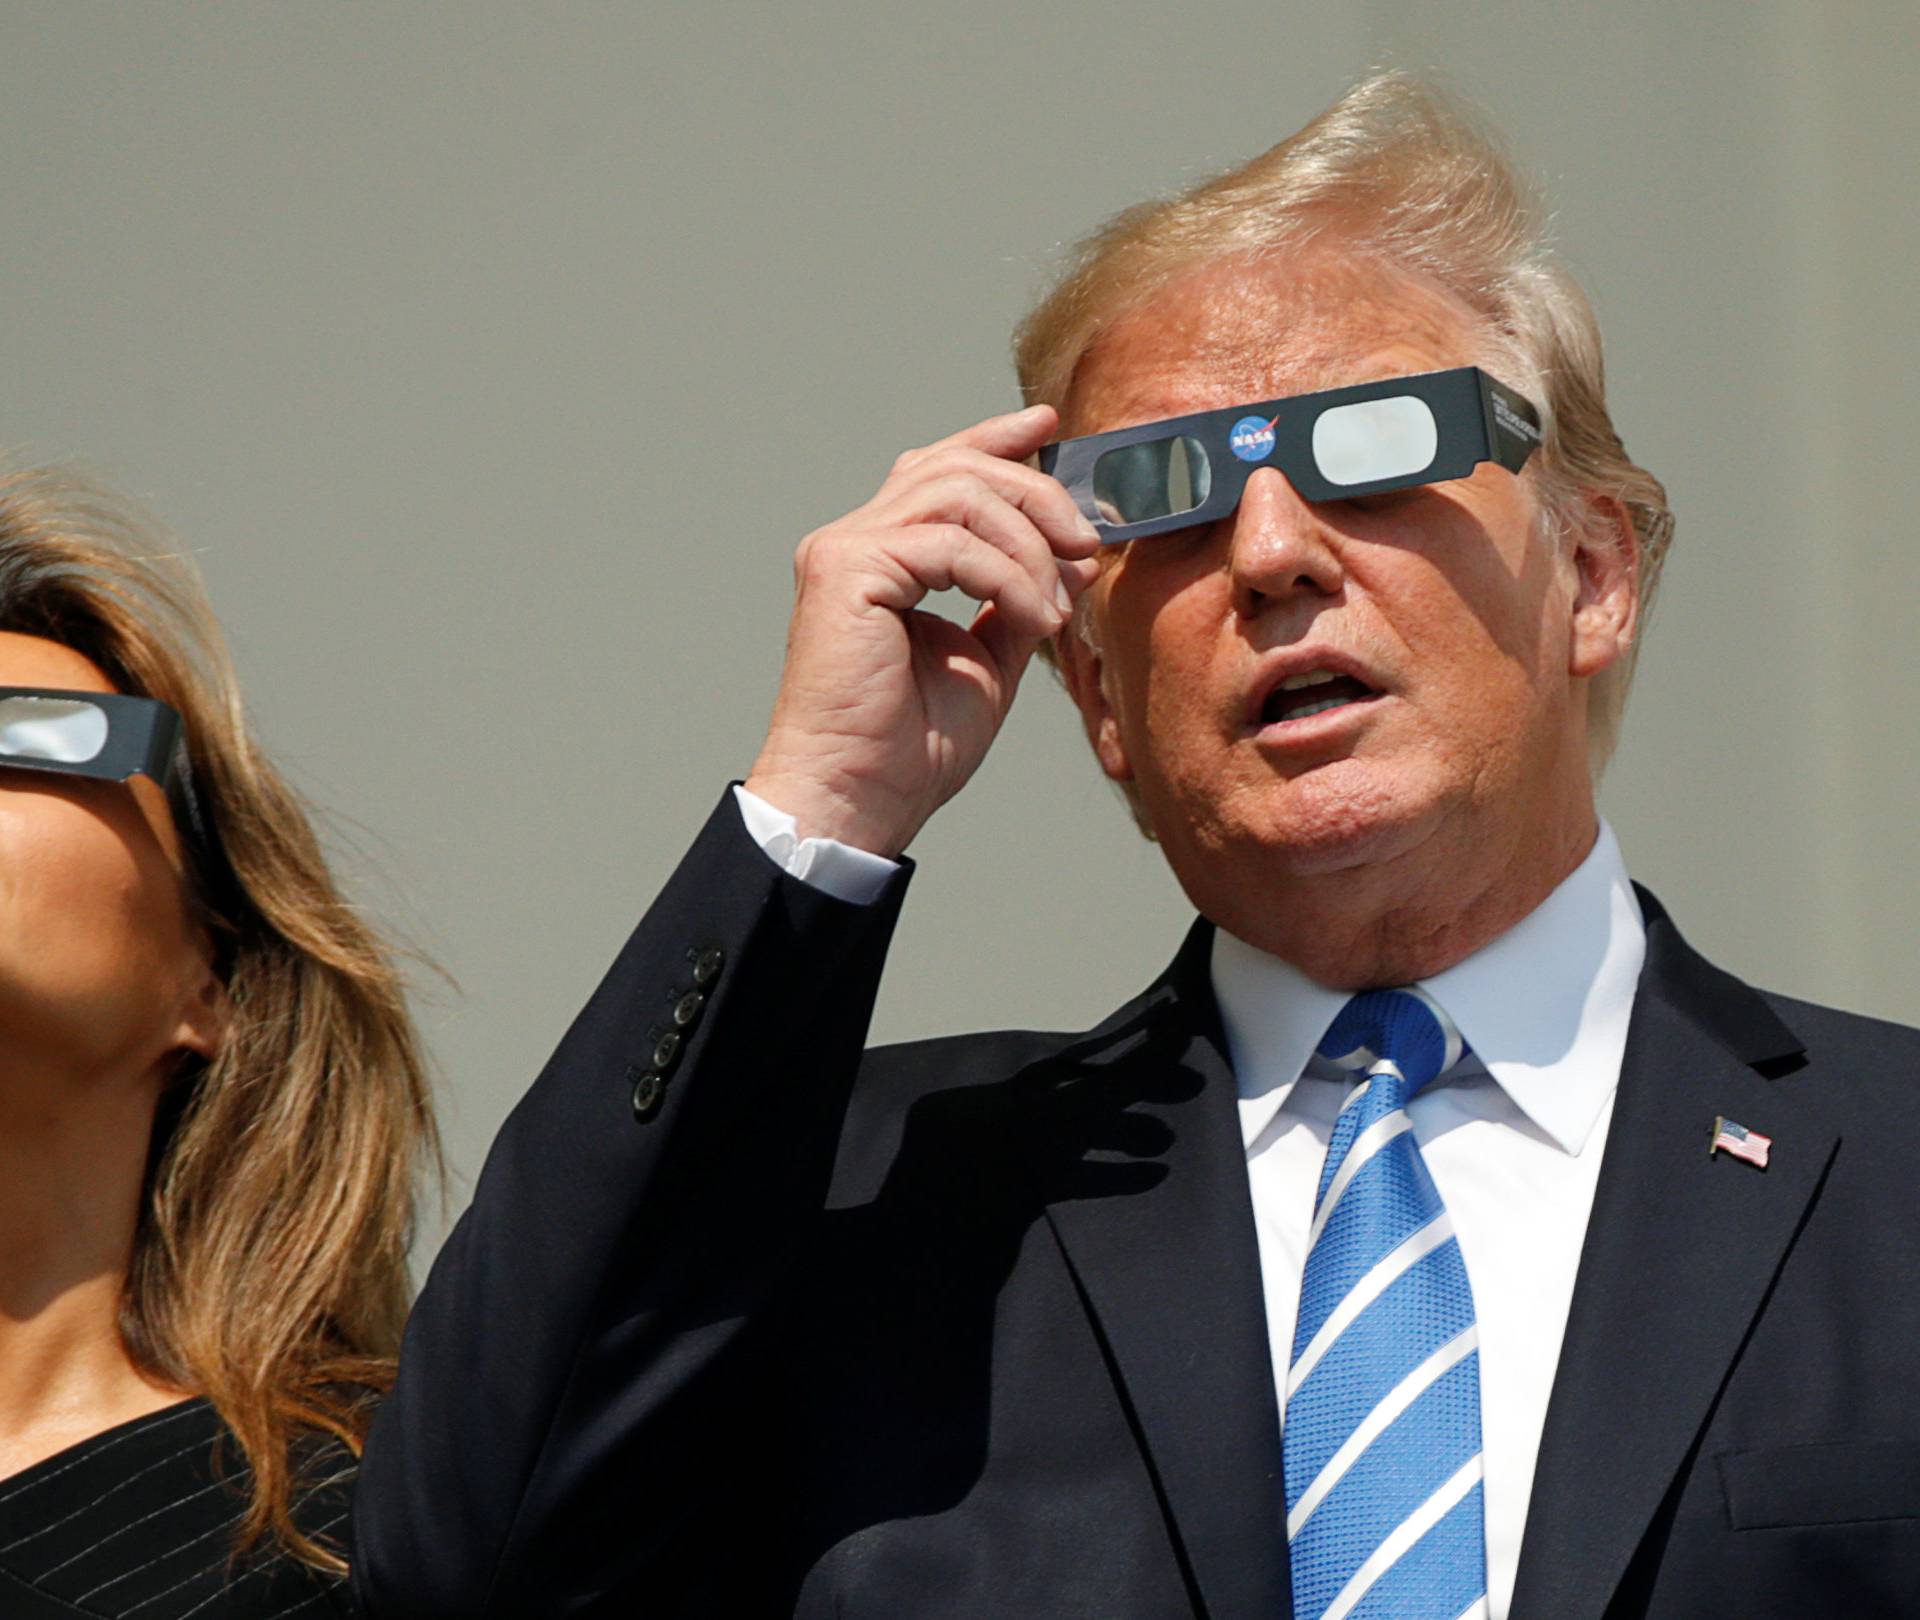 U.S. President Donald Trump and Melania Trump watch the solar eclipse from the White House in Washington